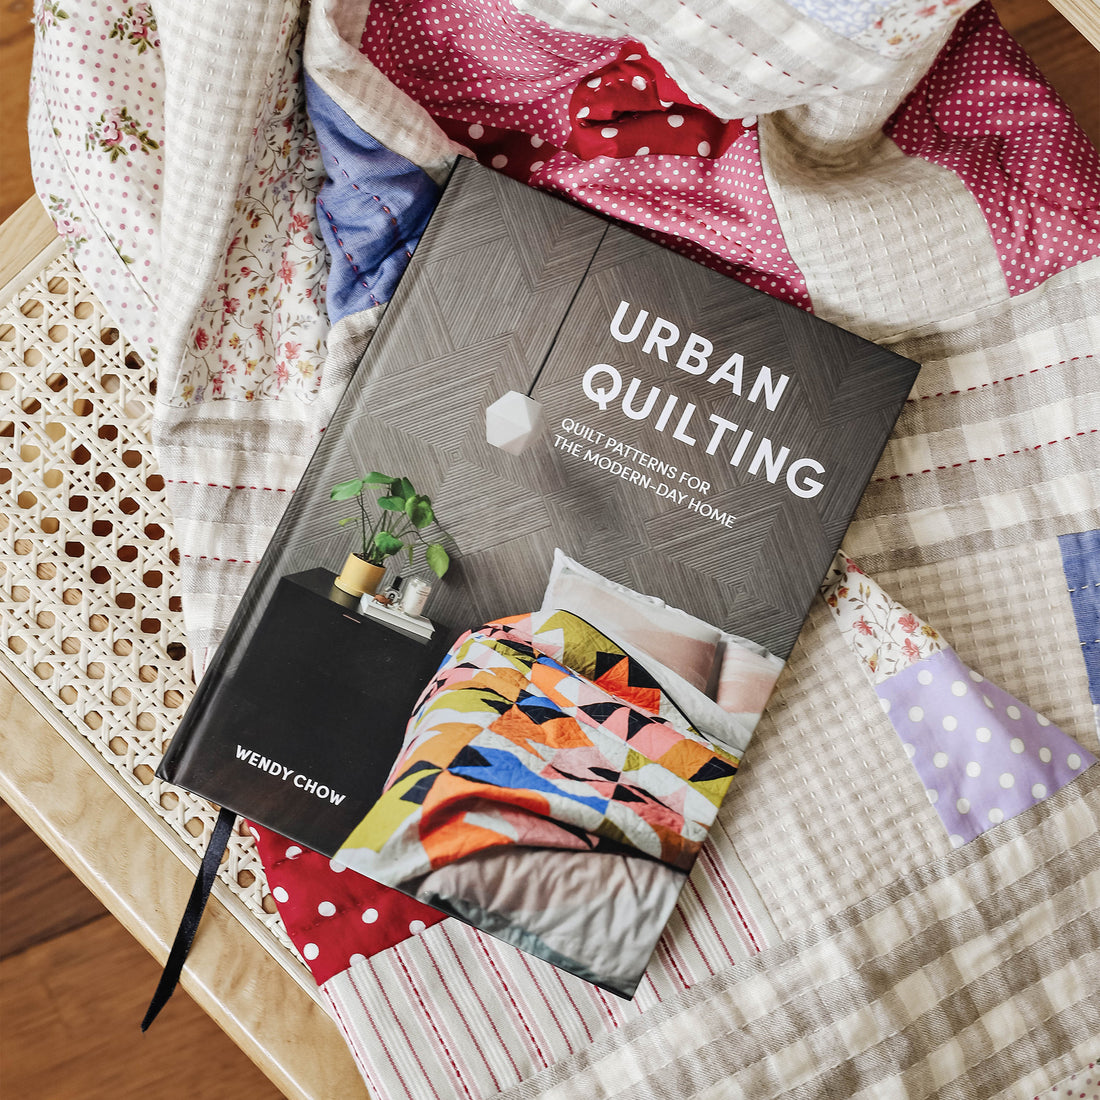 Urban Quilting Patterns Book by Wendy Chow